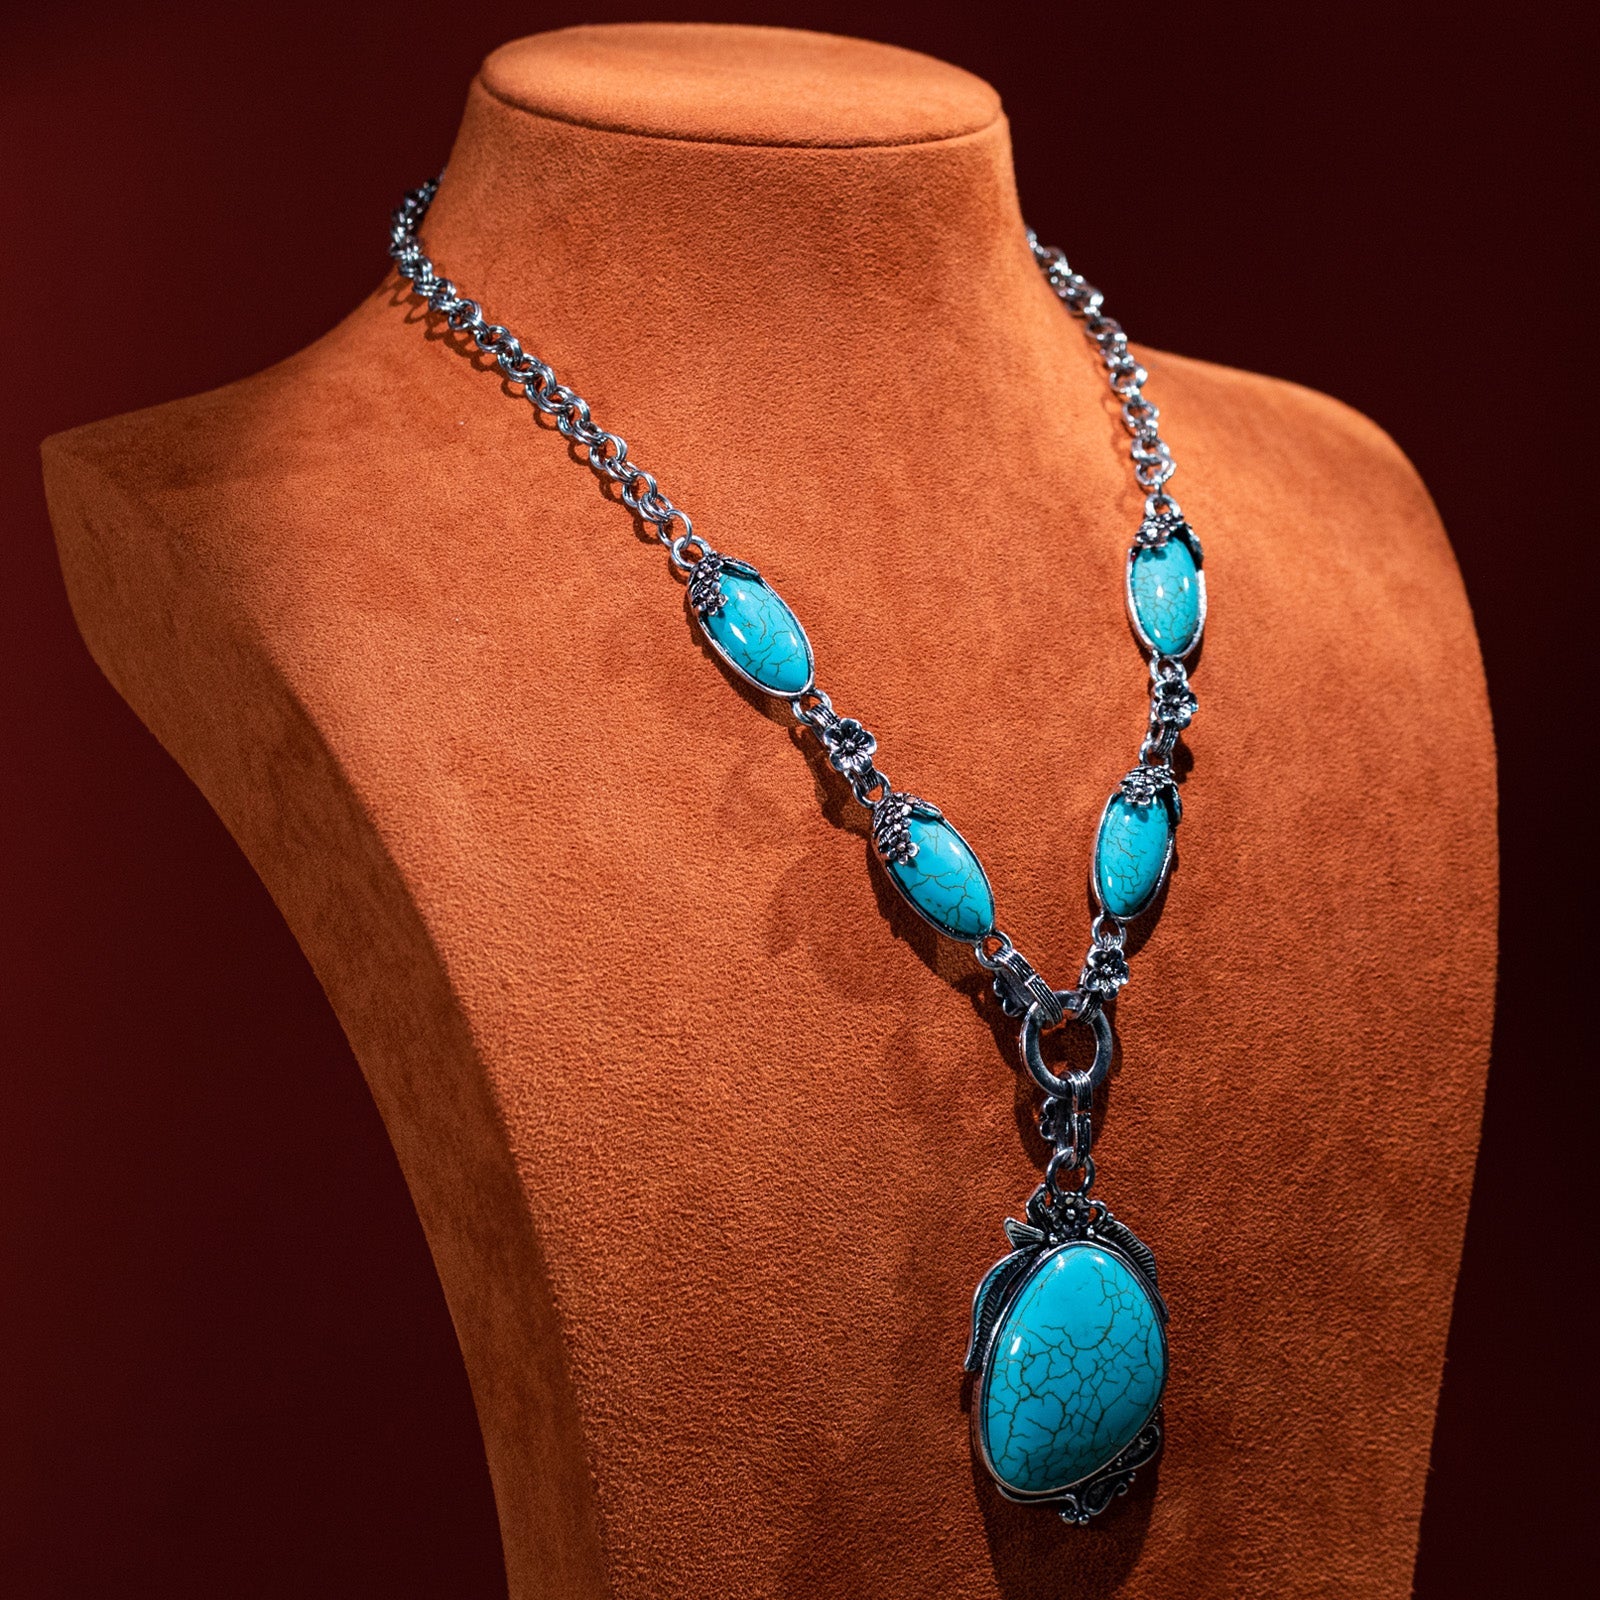 Rustic Couture Turquoise Concho Statement Necklace - Montana West World